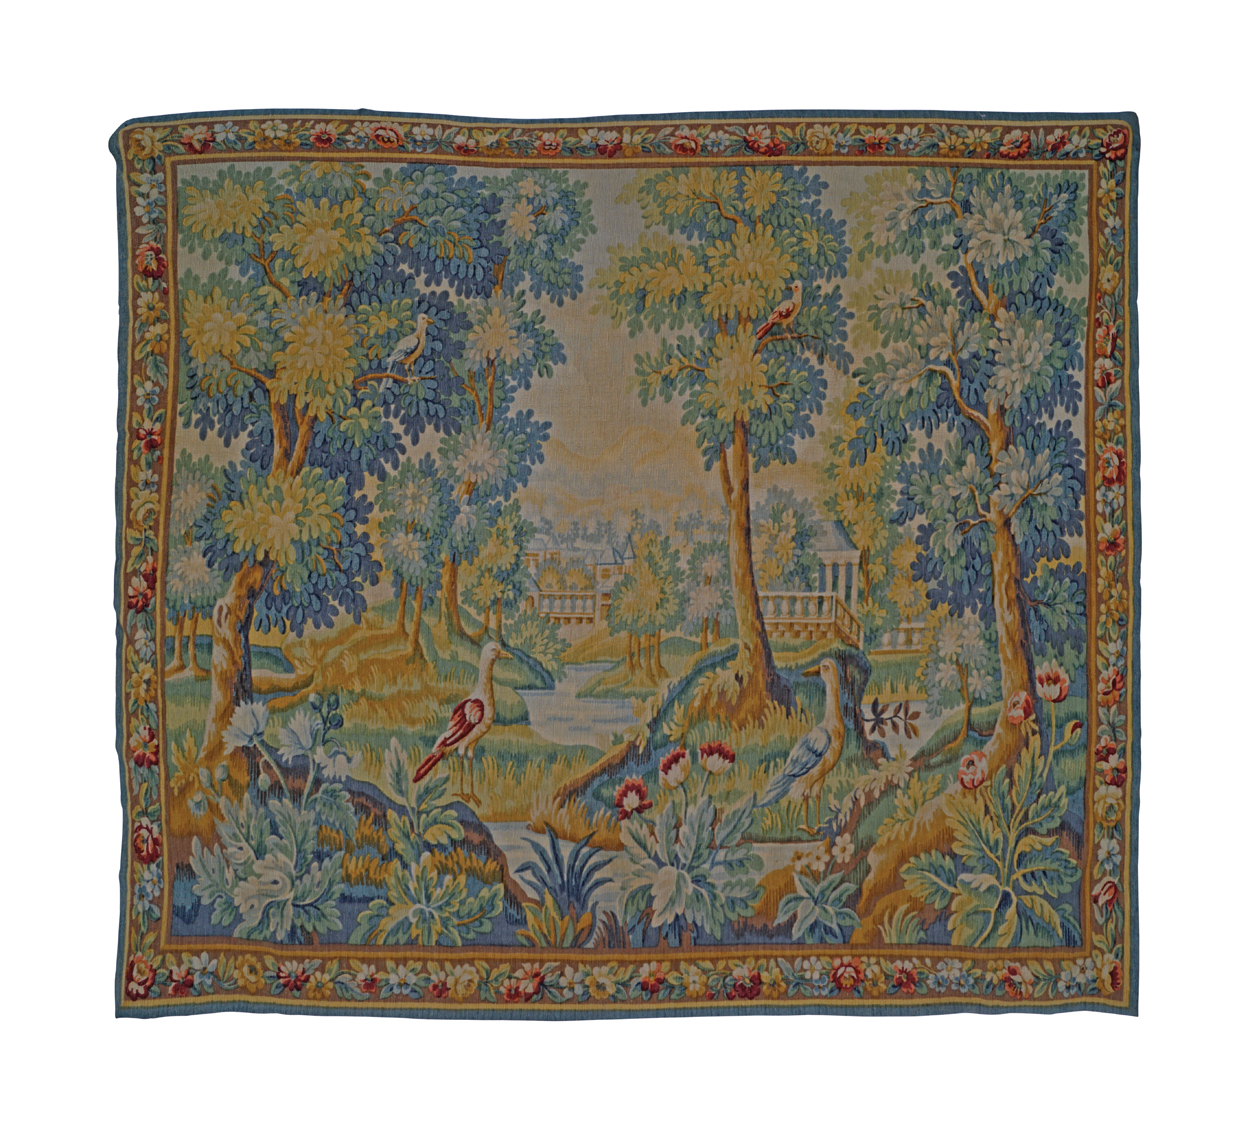 LARGE AUBUSSON HANGING TAPESTRY